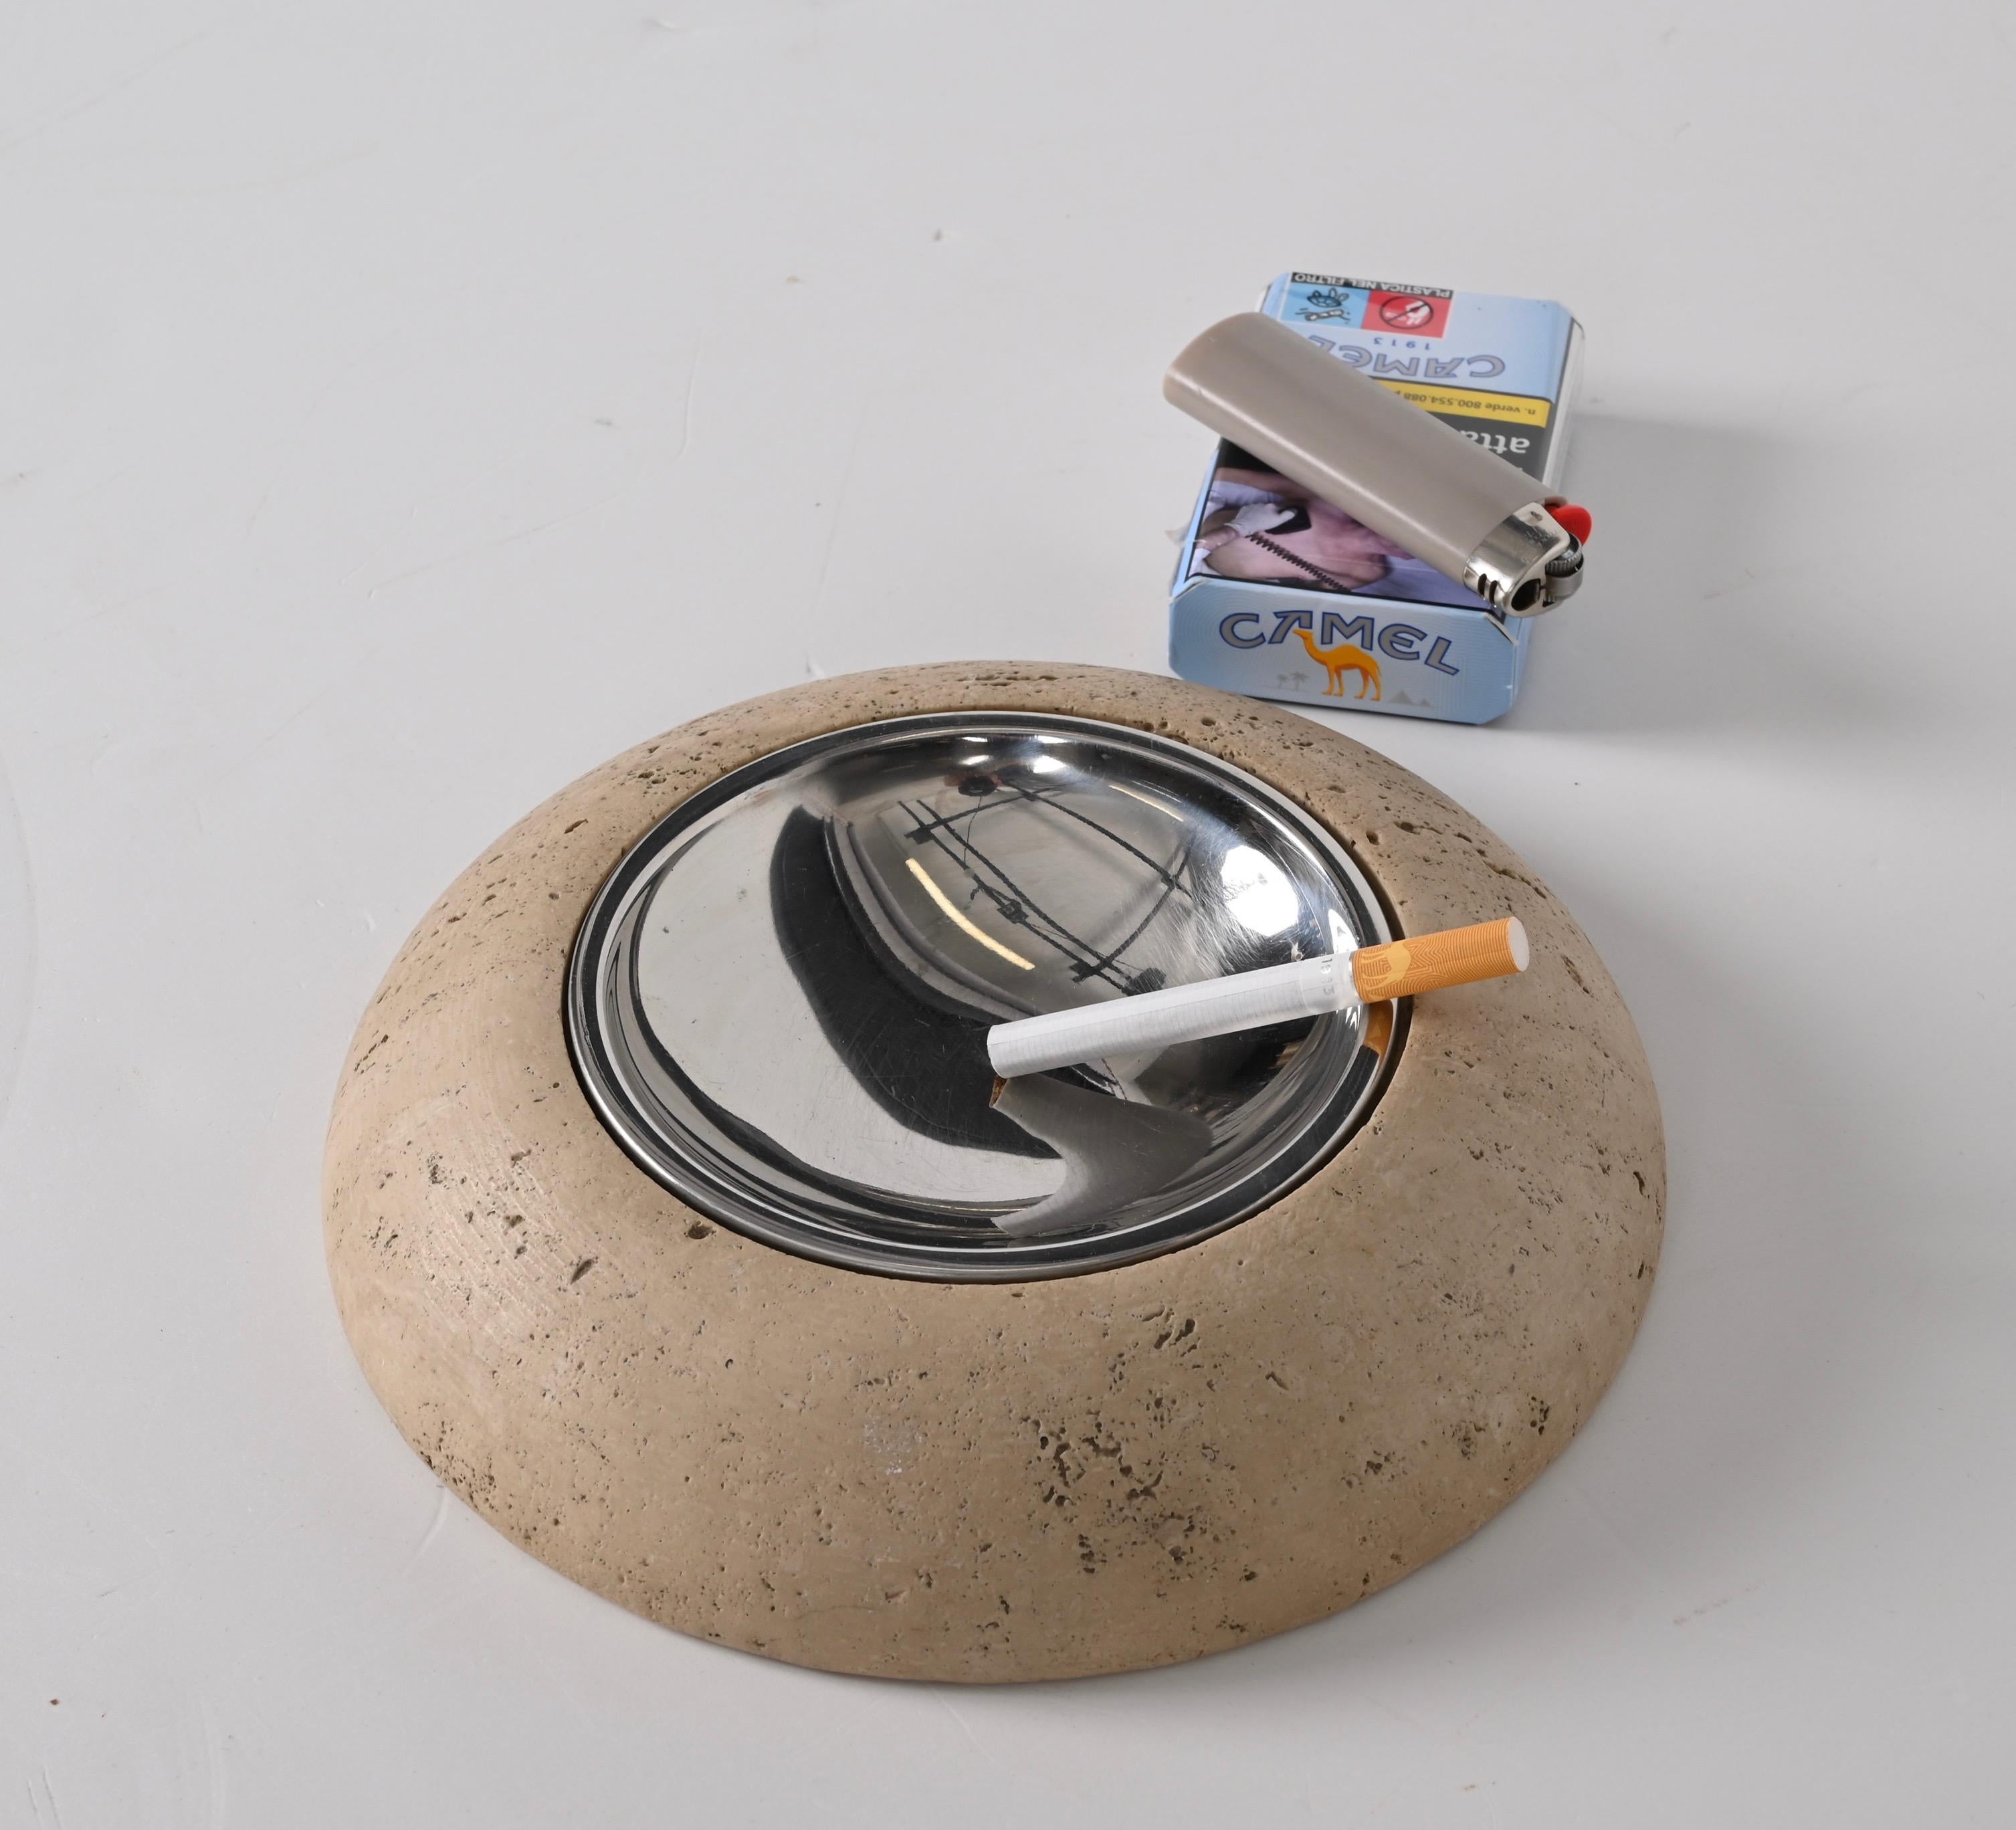 Midcentury Round Ashtray White Travertine Marble and Steel, Mannelli Italy 1970s For Sale 9